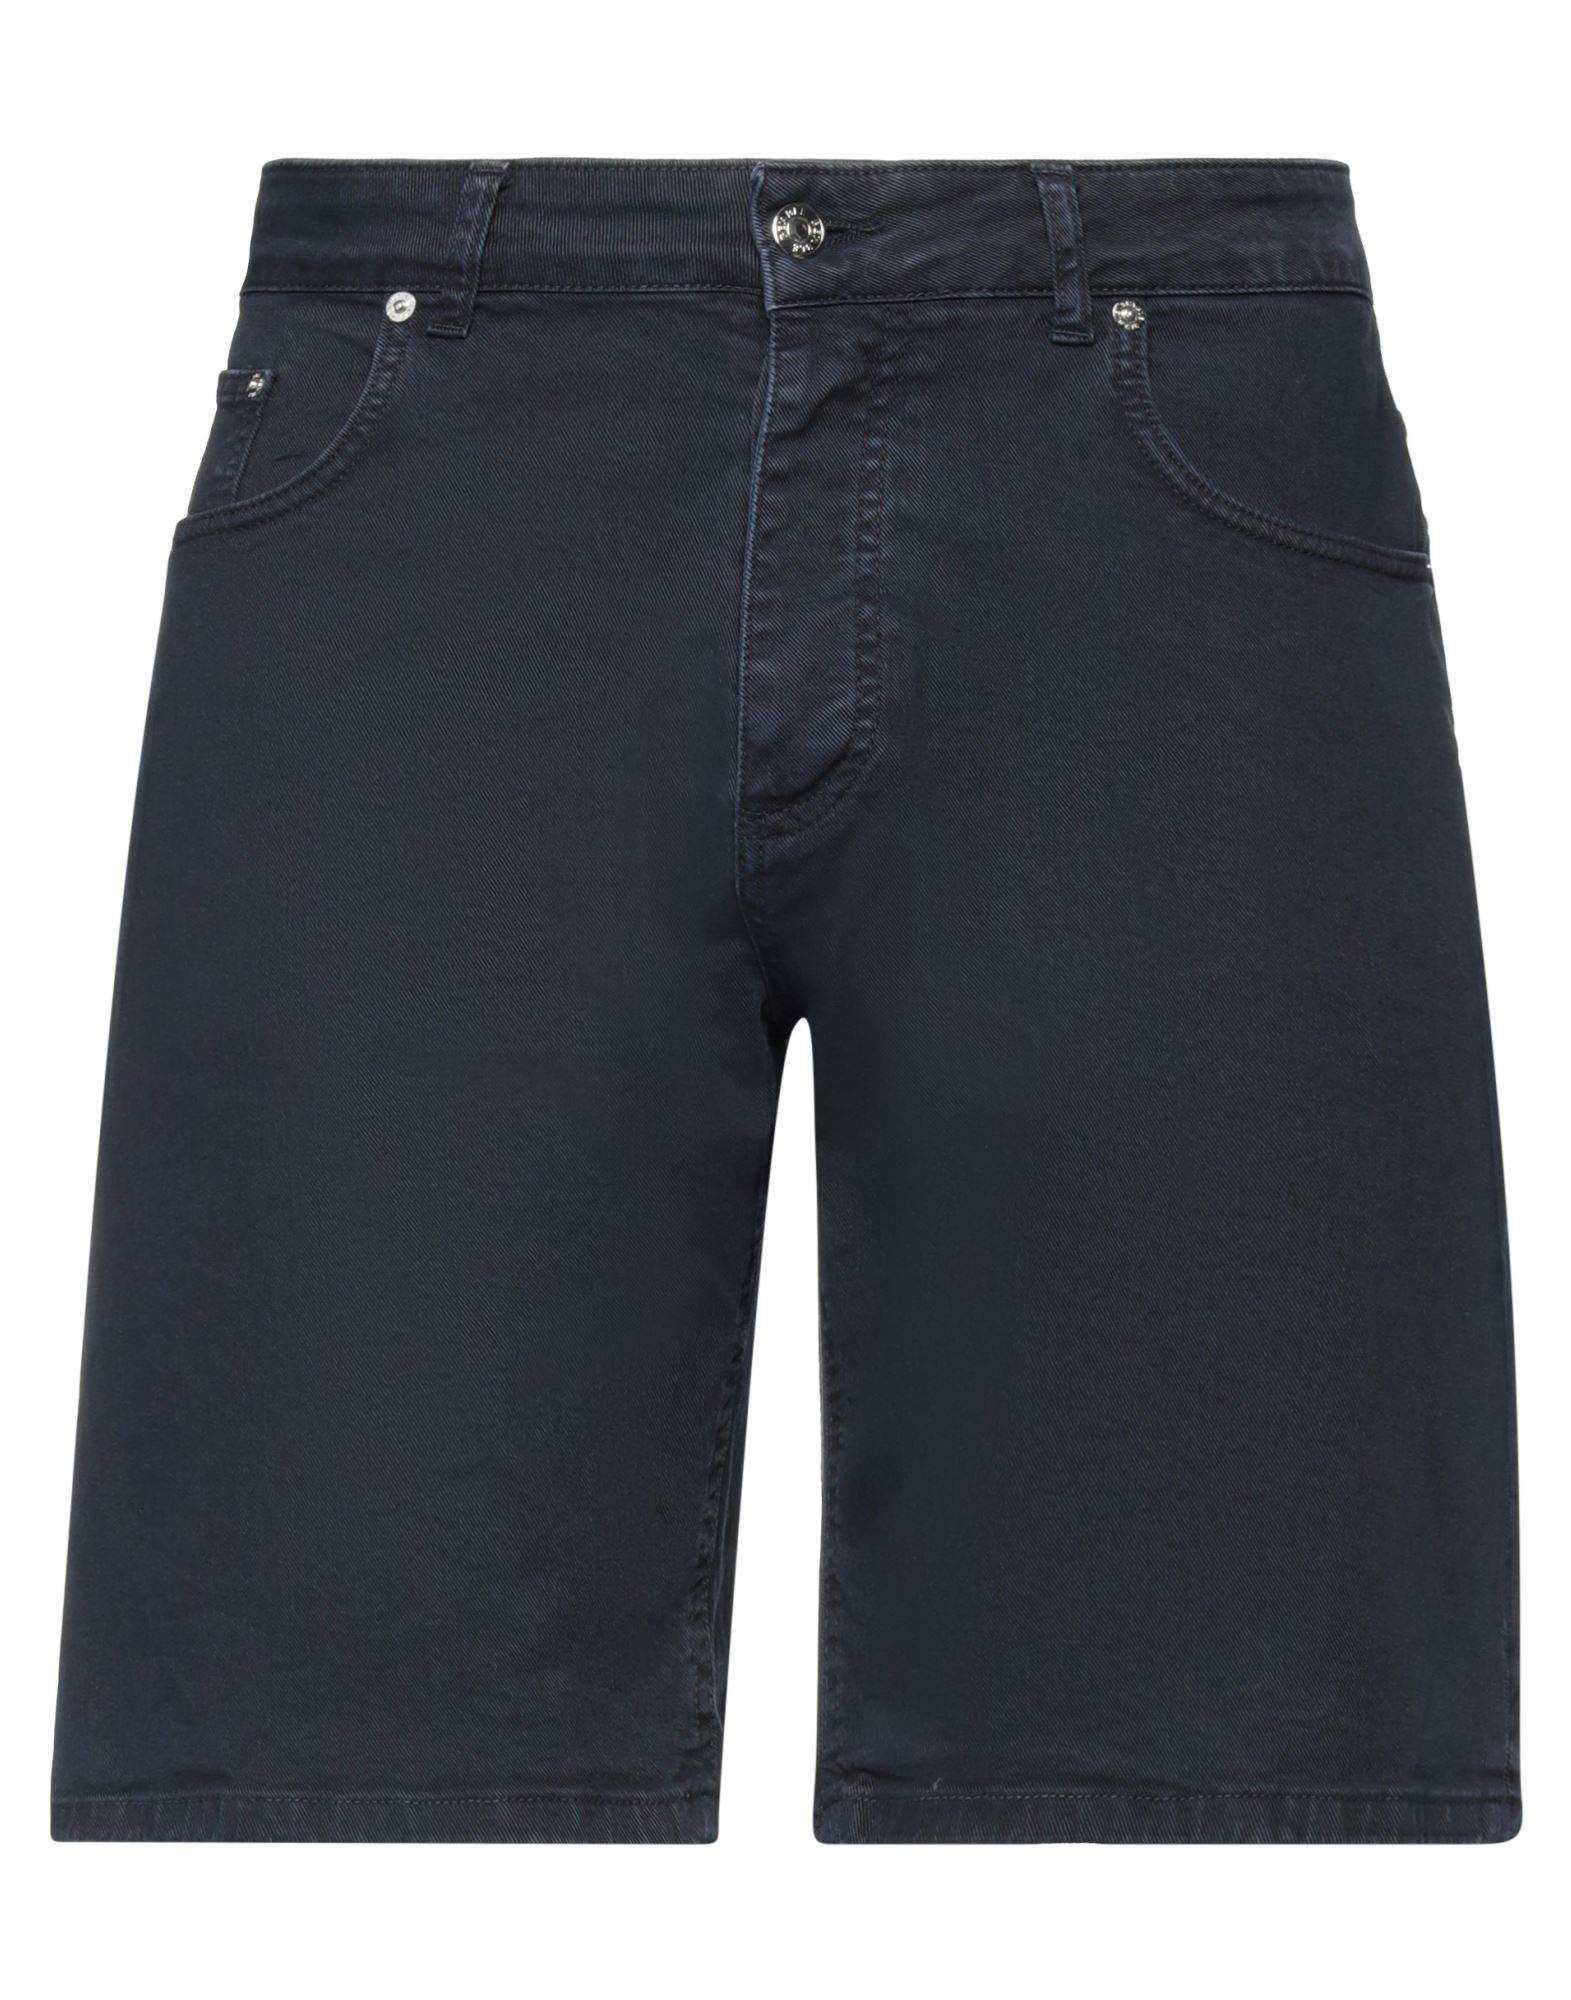 BE ABLE Jeansshorts Herren Nachtblau von BE ABLE